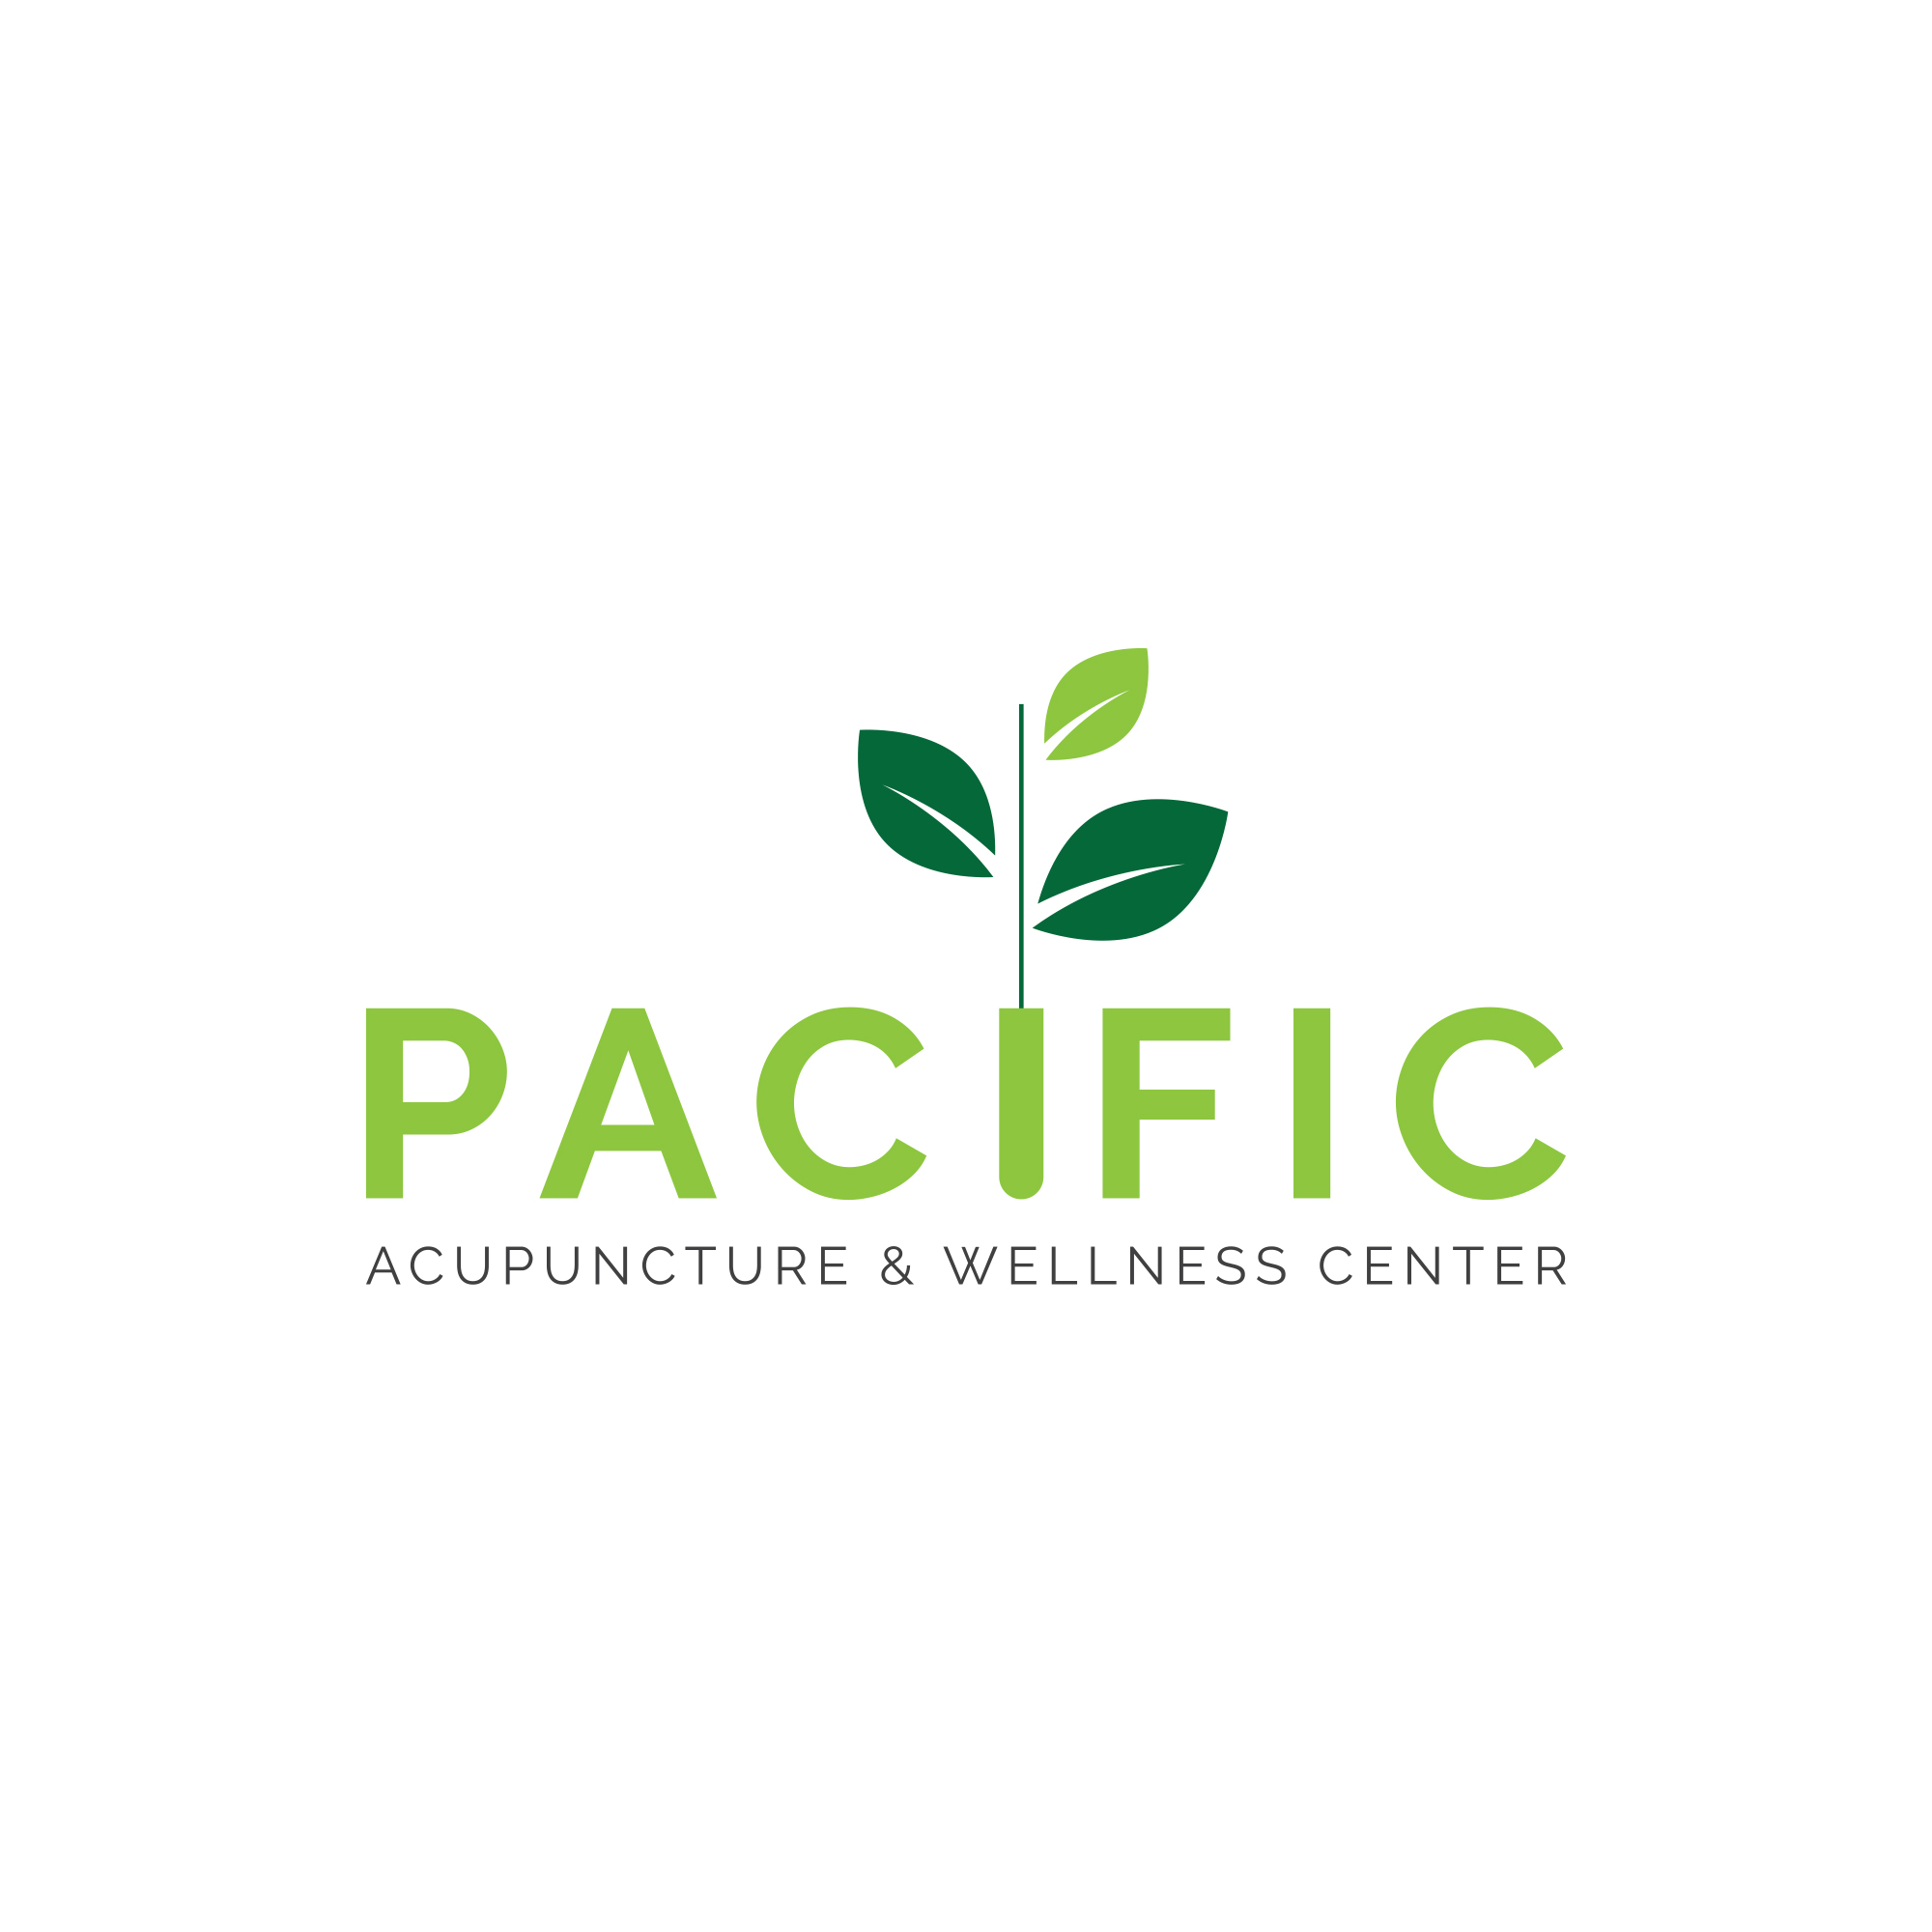 Pacific Acupuncture and Wellness Center | Food is Medicine